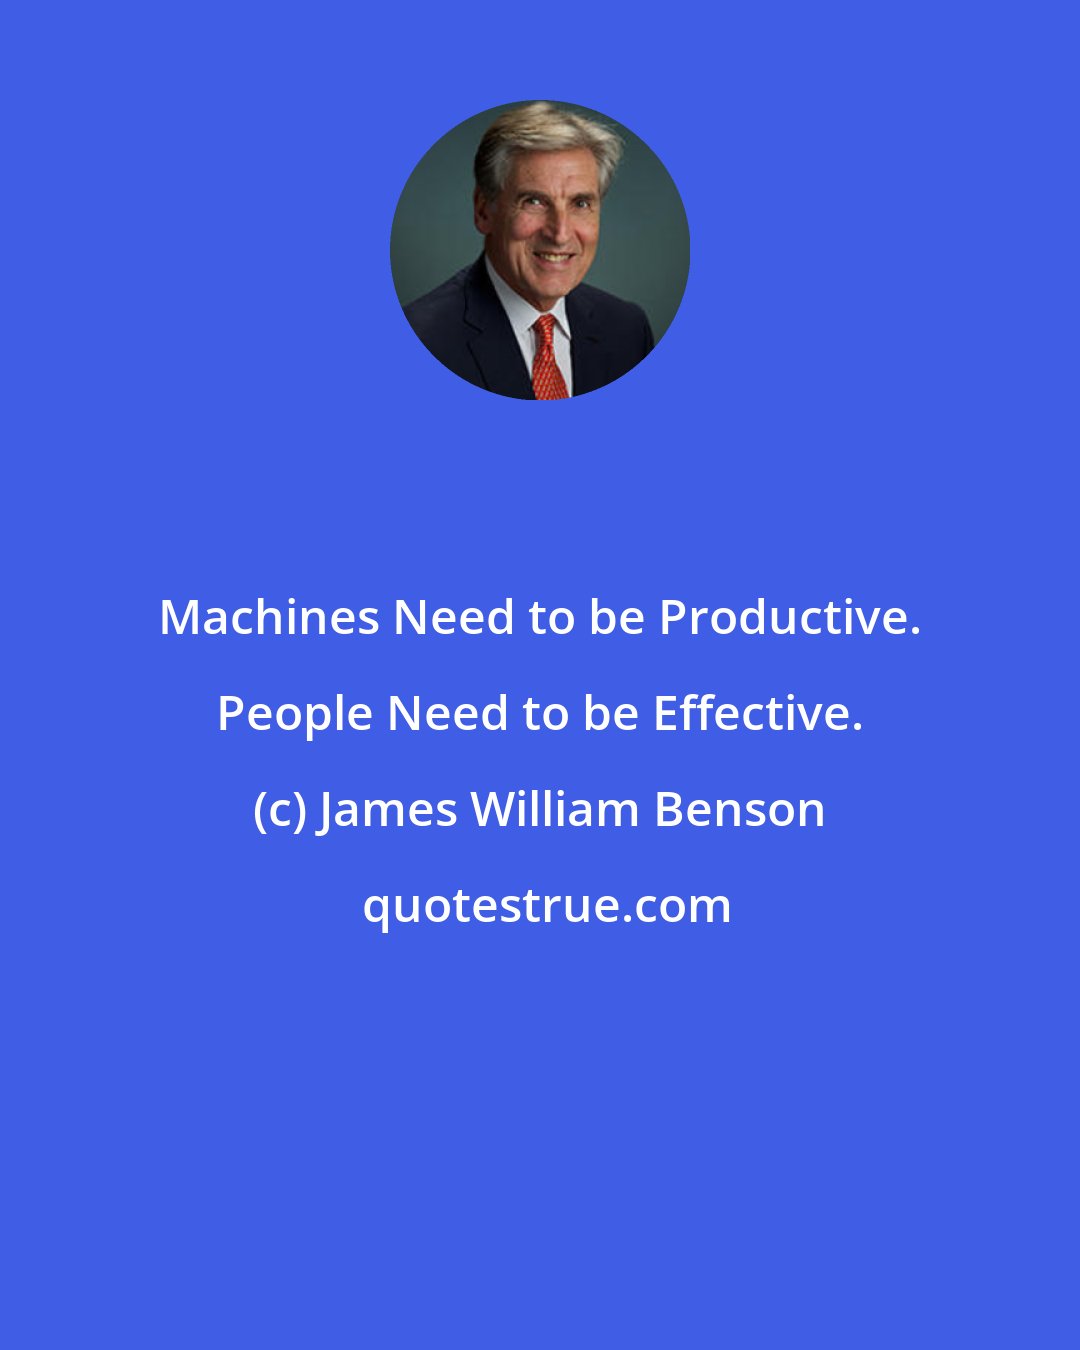 James William Benson: Machines Need to be Productive. People Need to be Effective.